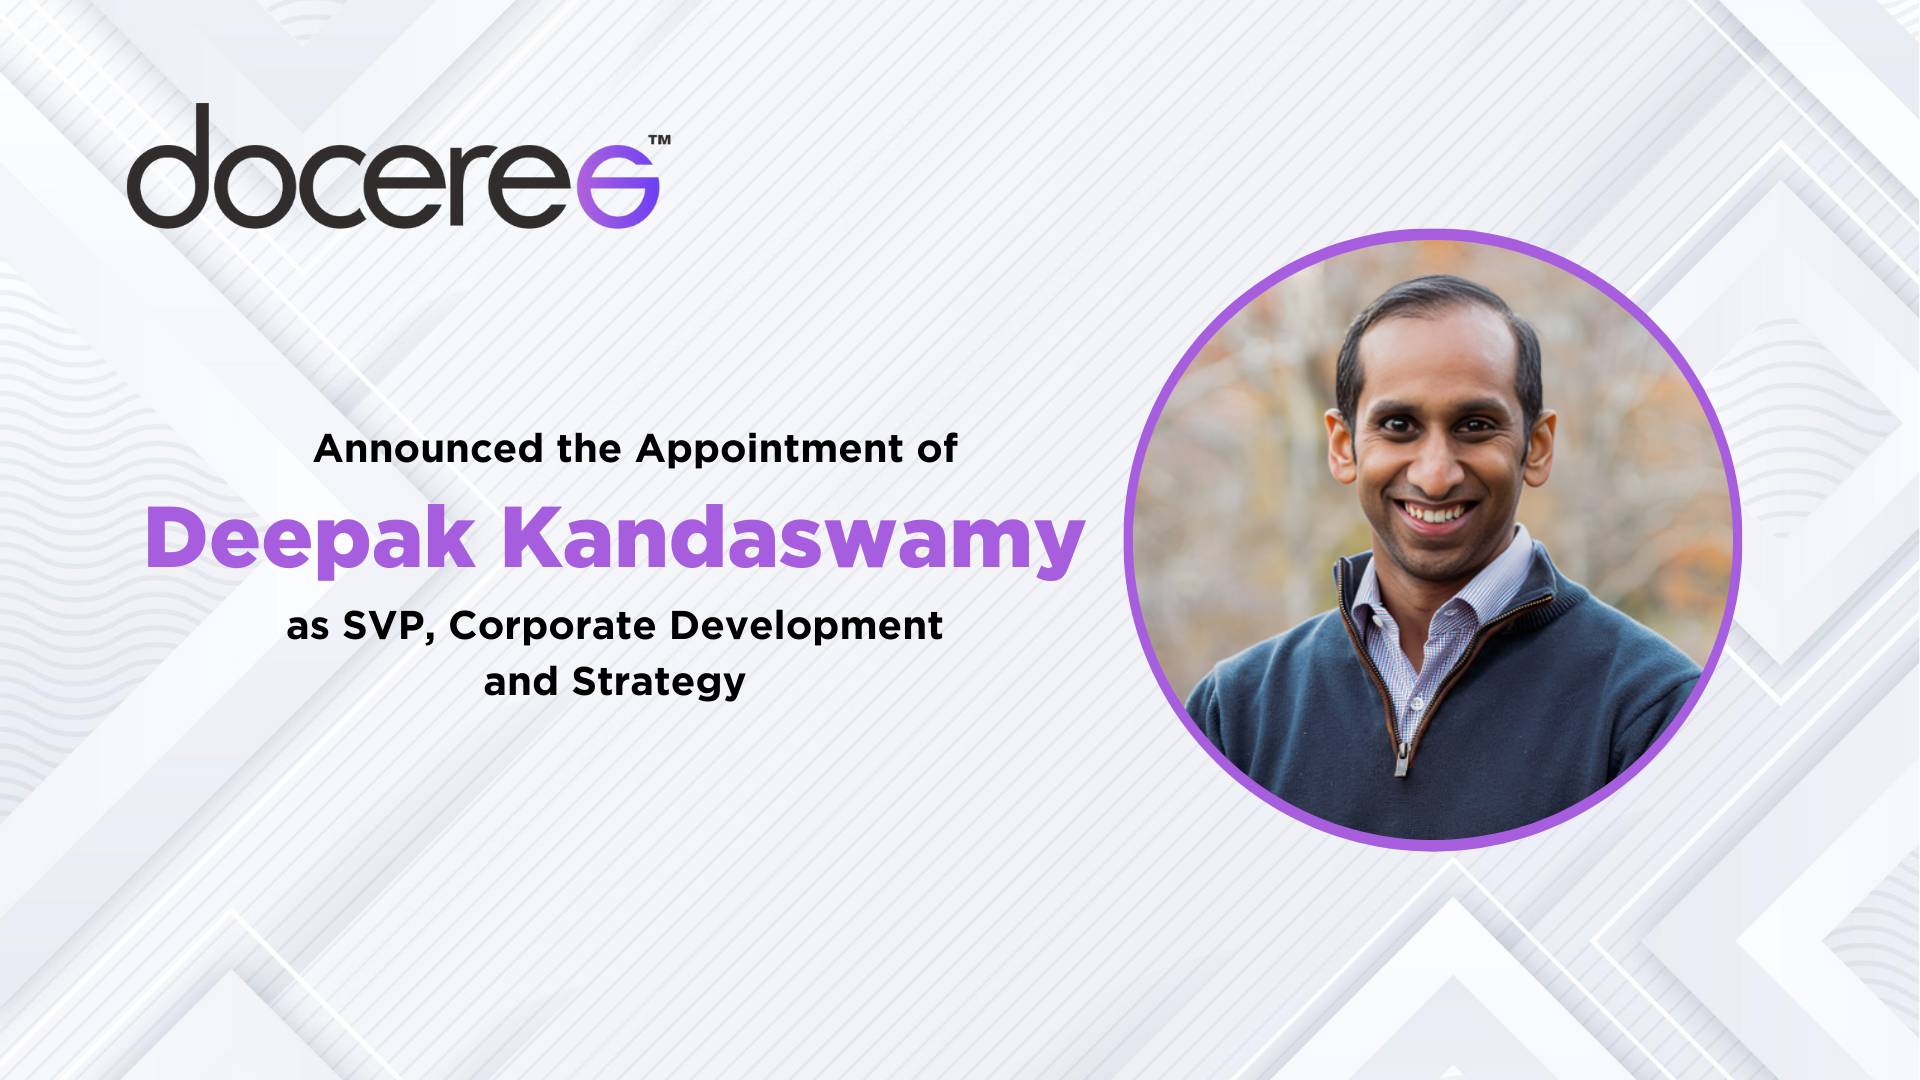 Doceree Expands Leadership Bench with Deepak Kandaswamy as SVP of Corporate Development & Strategy for Global Growth